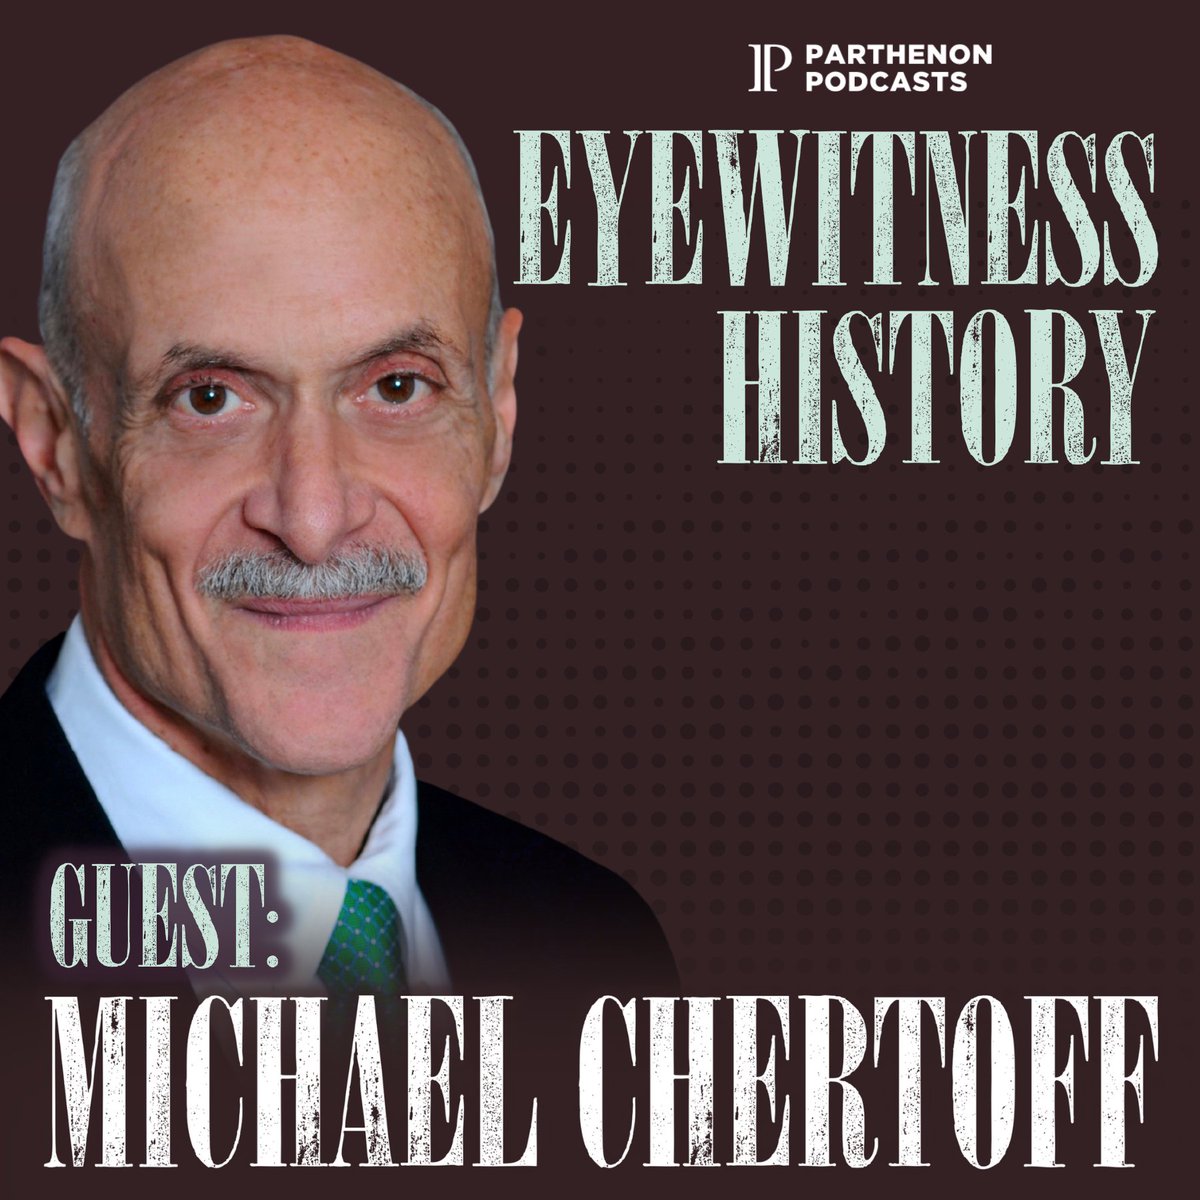 I had the pleasure of sitting down with the former Head of DHS and founder of @ChertoffGroup , Secretary Michael Chertoff. We discuss leadership philosophy, the Patriot Act, and much more!

Apple Podcasts: rb.gy/cw53b

Spotify: rb.gy/fe0ms